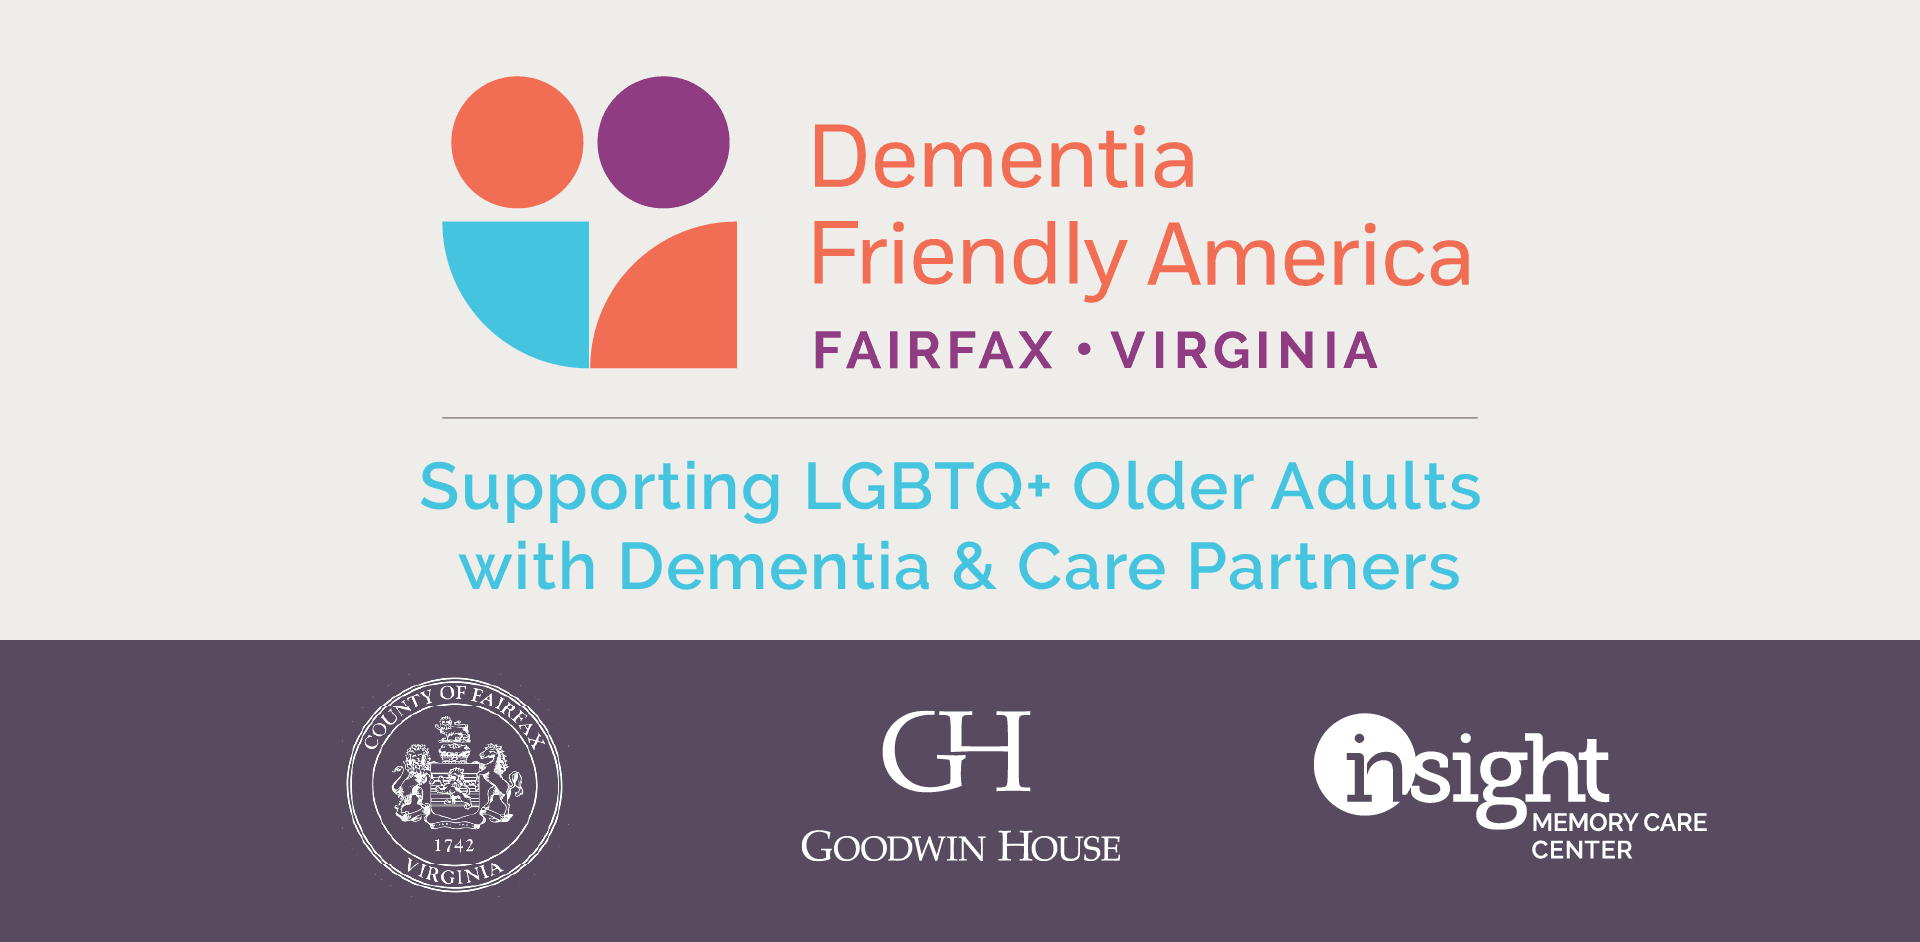 Dementia Friendly Fairfax: Supporting LGBTQ+ Older Adults with Dementia & Care Partners